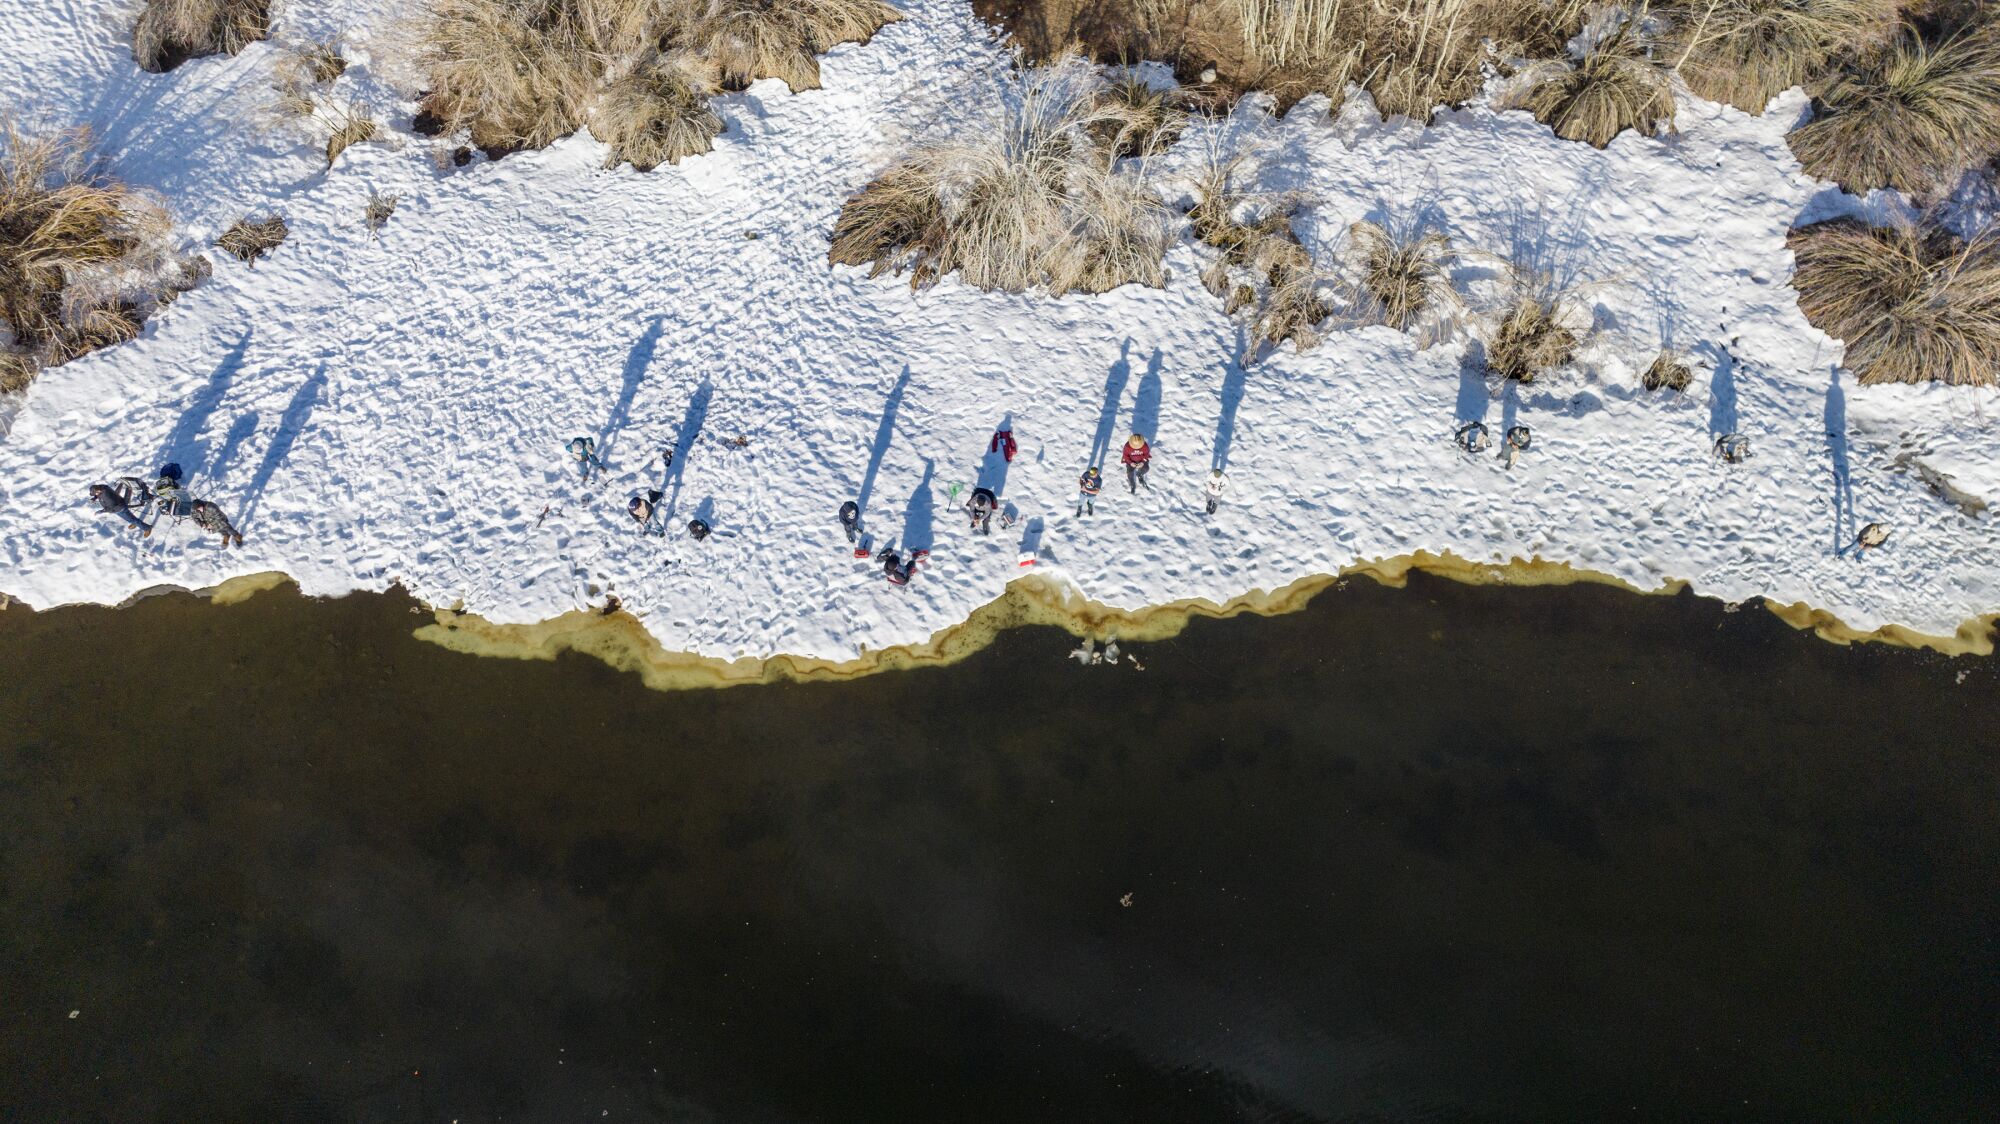 Anglers cast long shadows on a snow-covered shoreline.